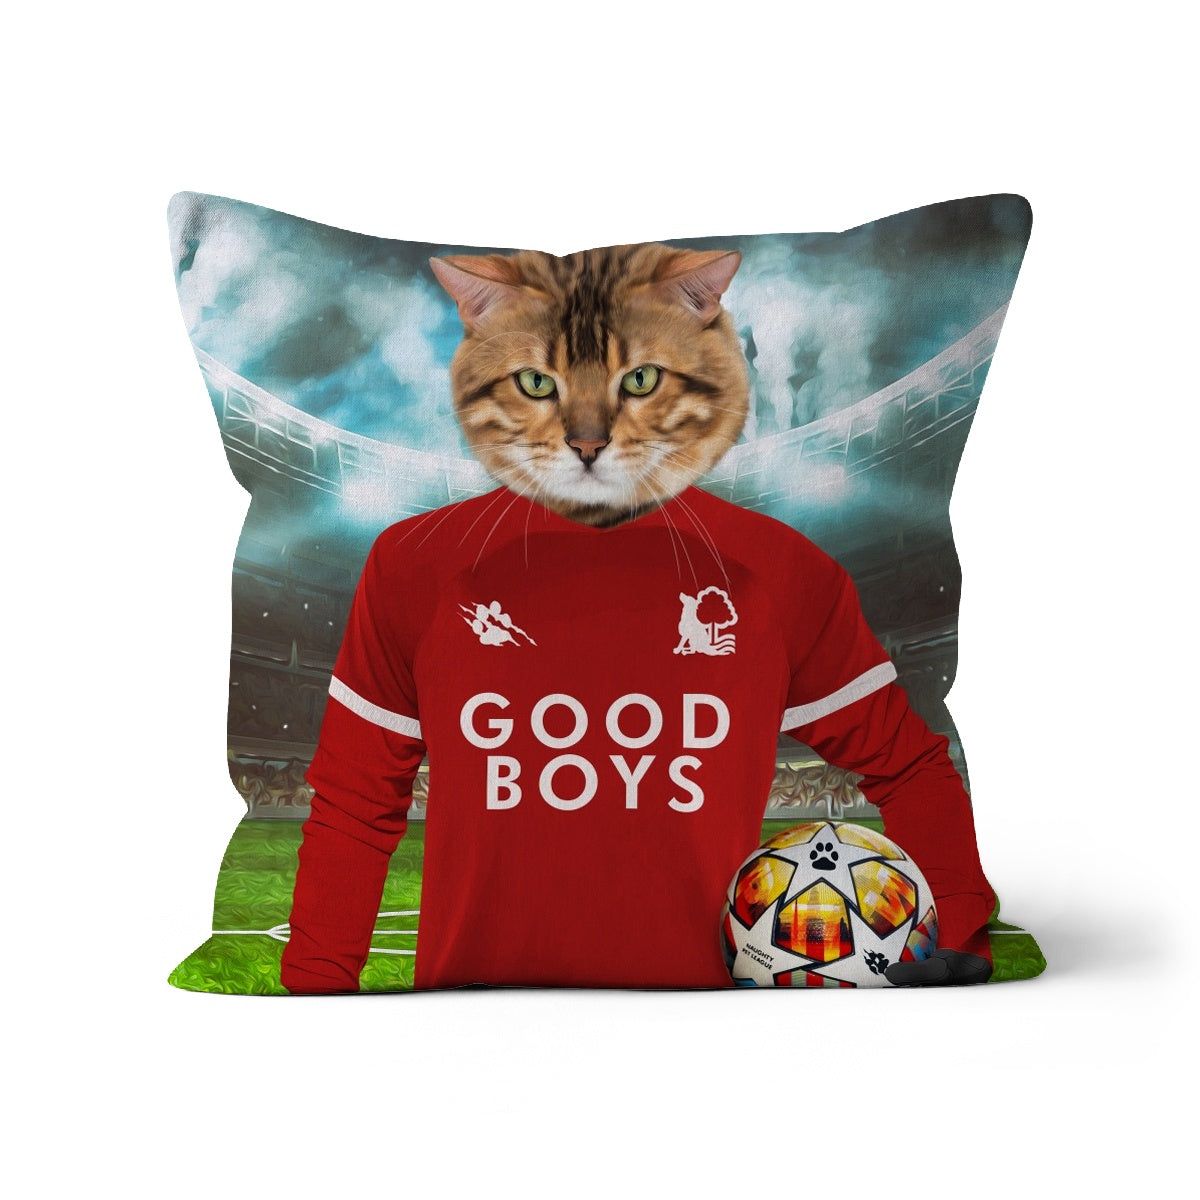 Nottingham Furrest Football Club Paw & Glory, paw and glory, dog personalized pillow, pillows with dogs picture, throw pillow personalized, my pet pillow, pet picture on pillow, pillow of your dog, Pet Portrait cushion